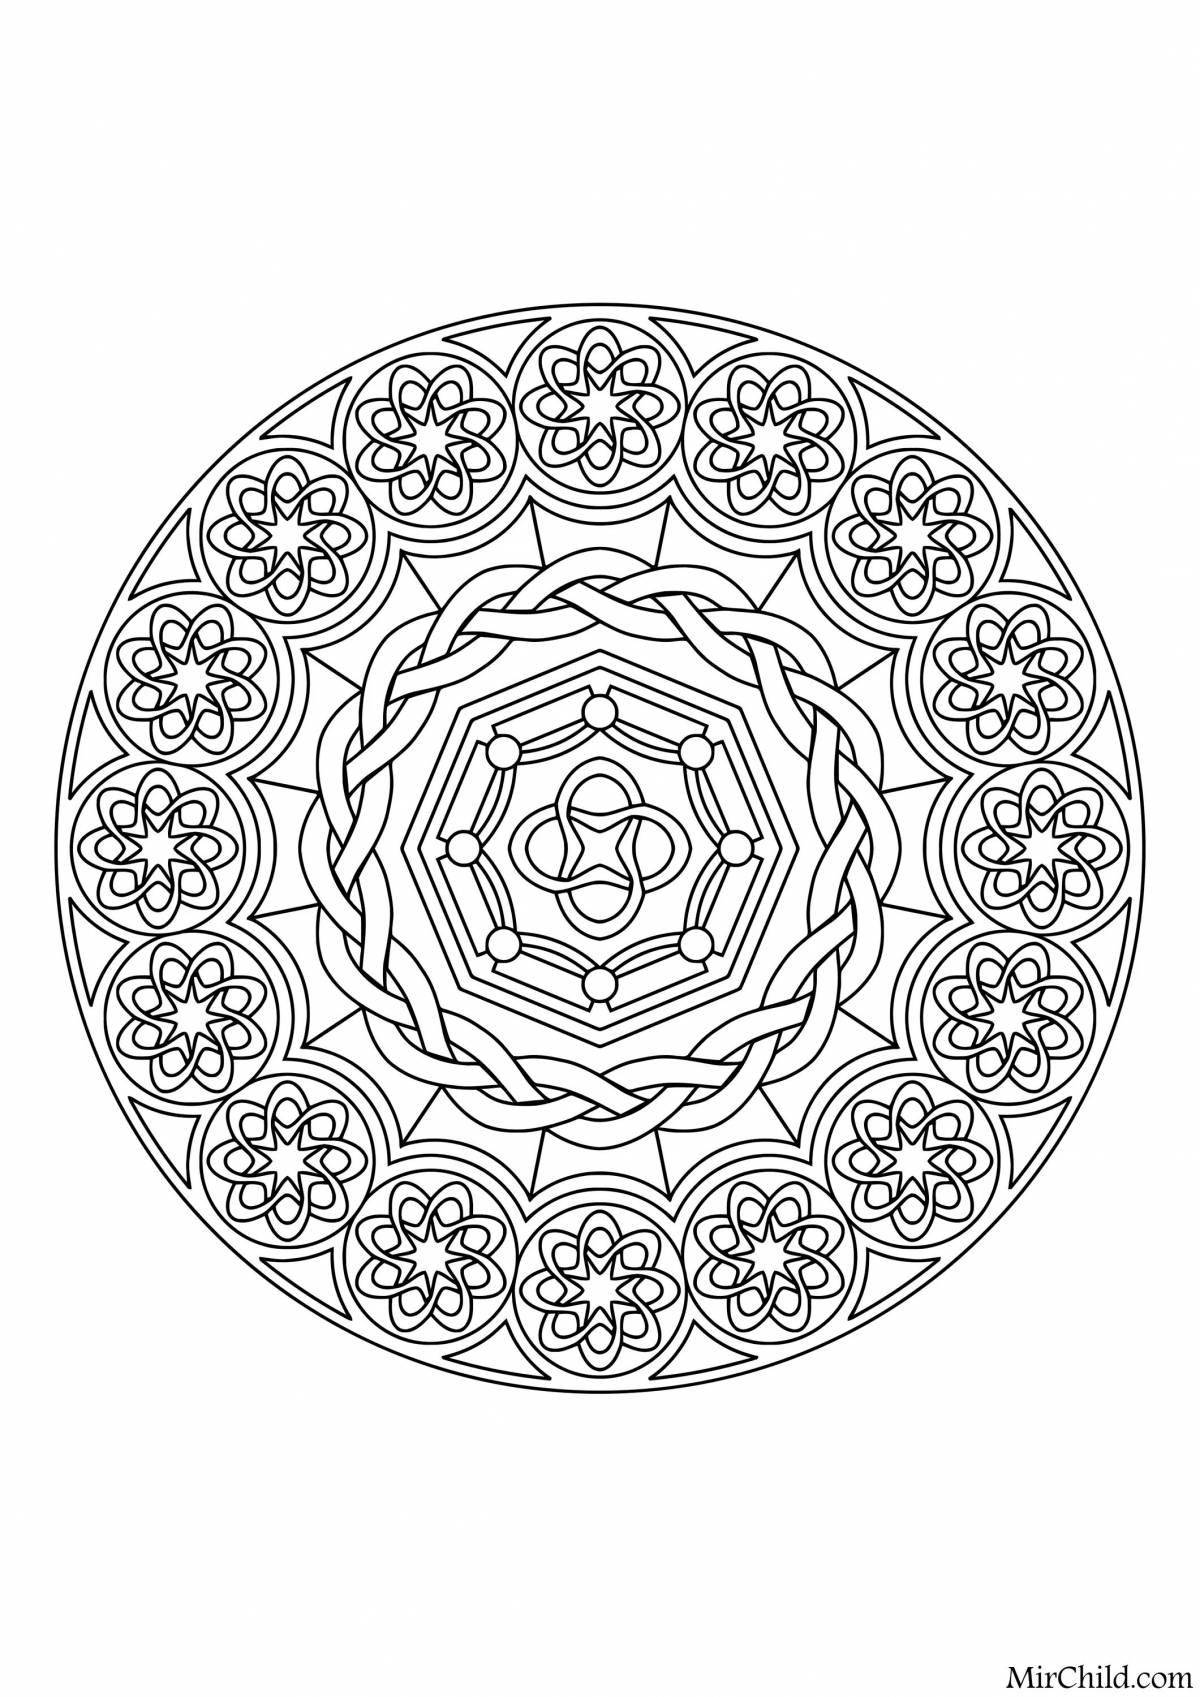 Great coloring mandala peace and tranquility